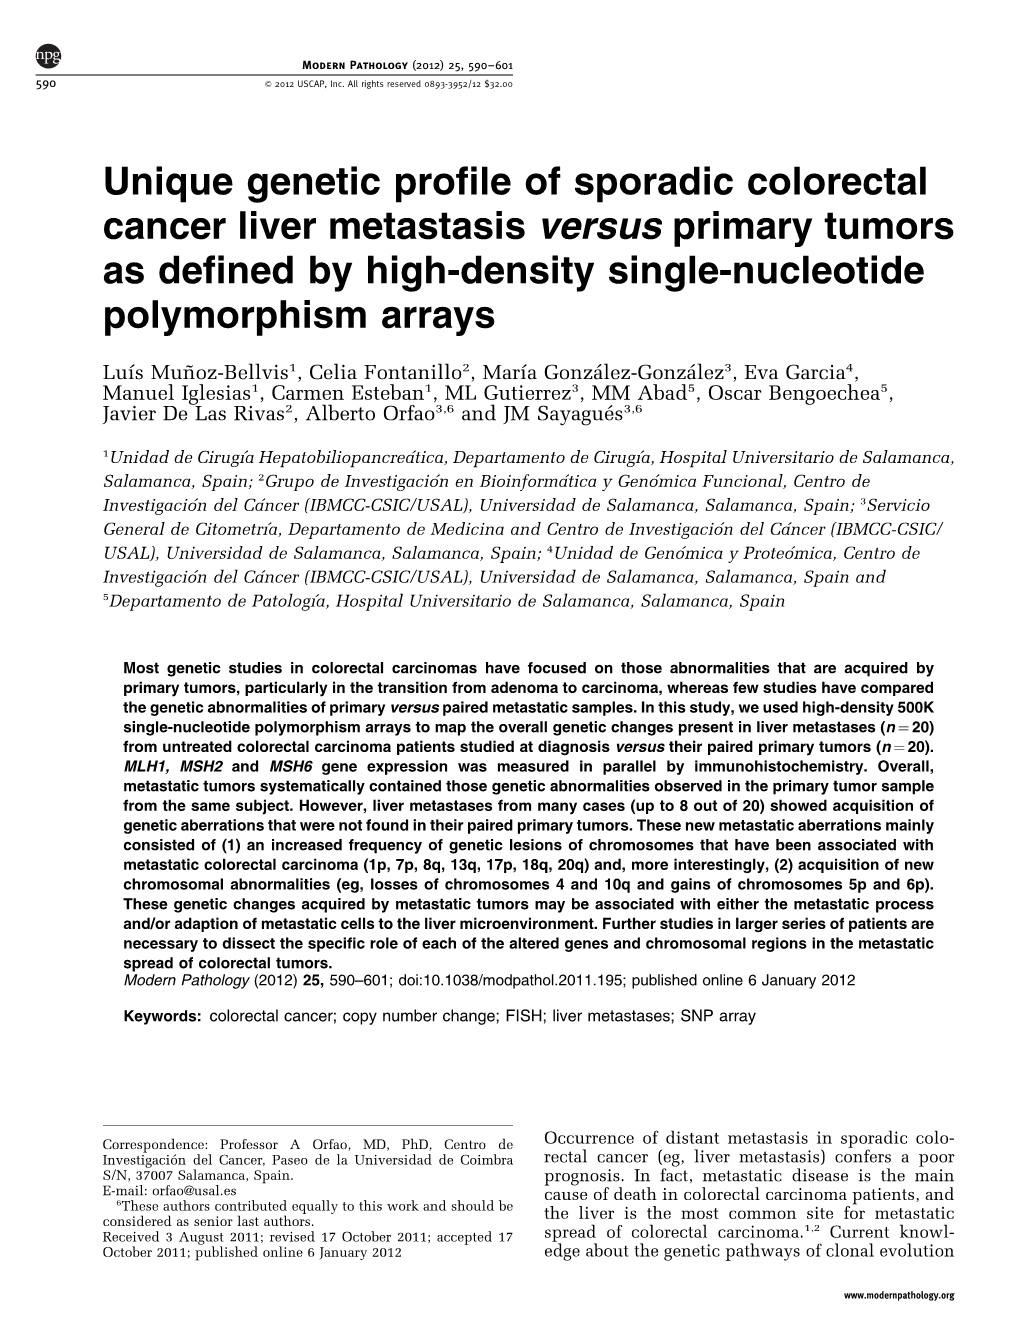 Unique Genetic Profile of Sporadic Colorectal Cancer Liver Metastasis Versus Primary Tumors As Defined by High-Density Single-Nucleotide Polymorphism Arrays